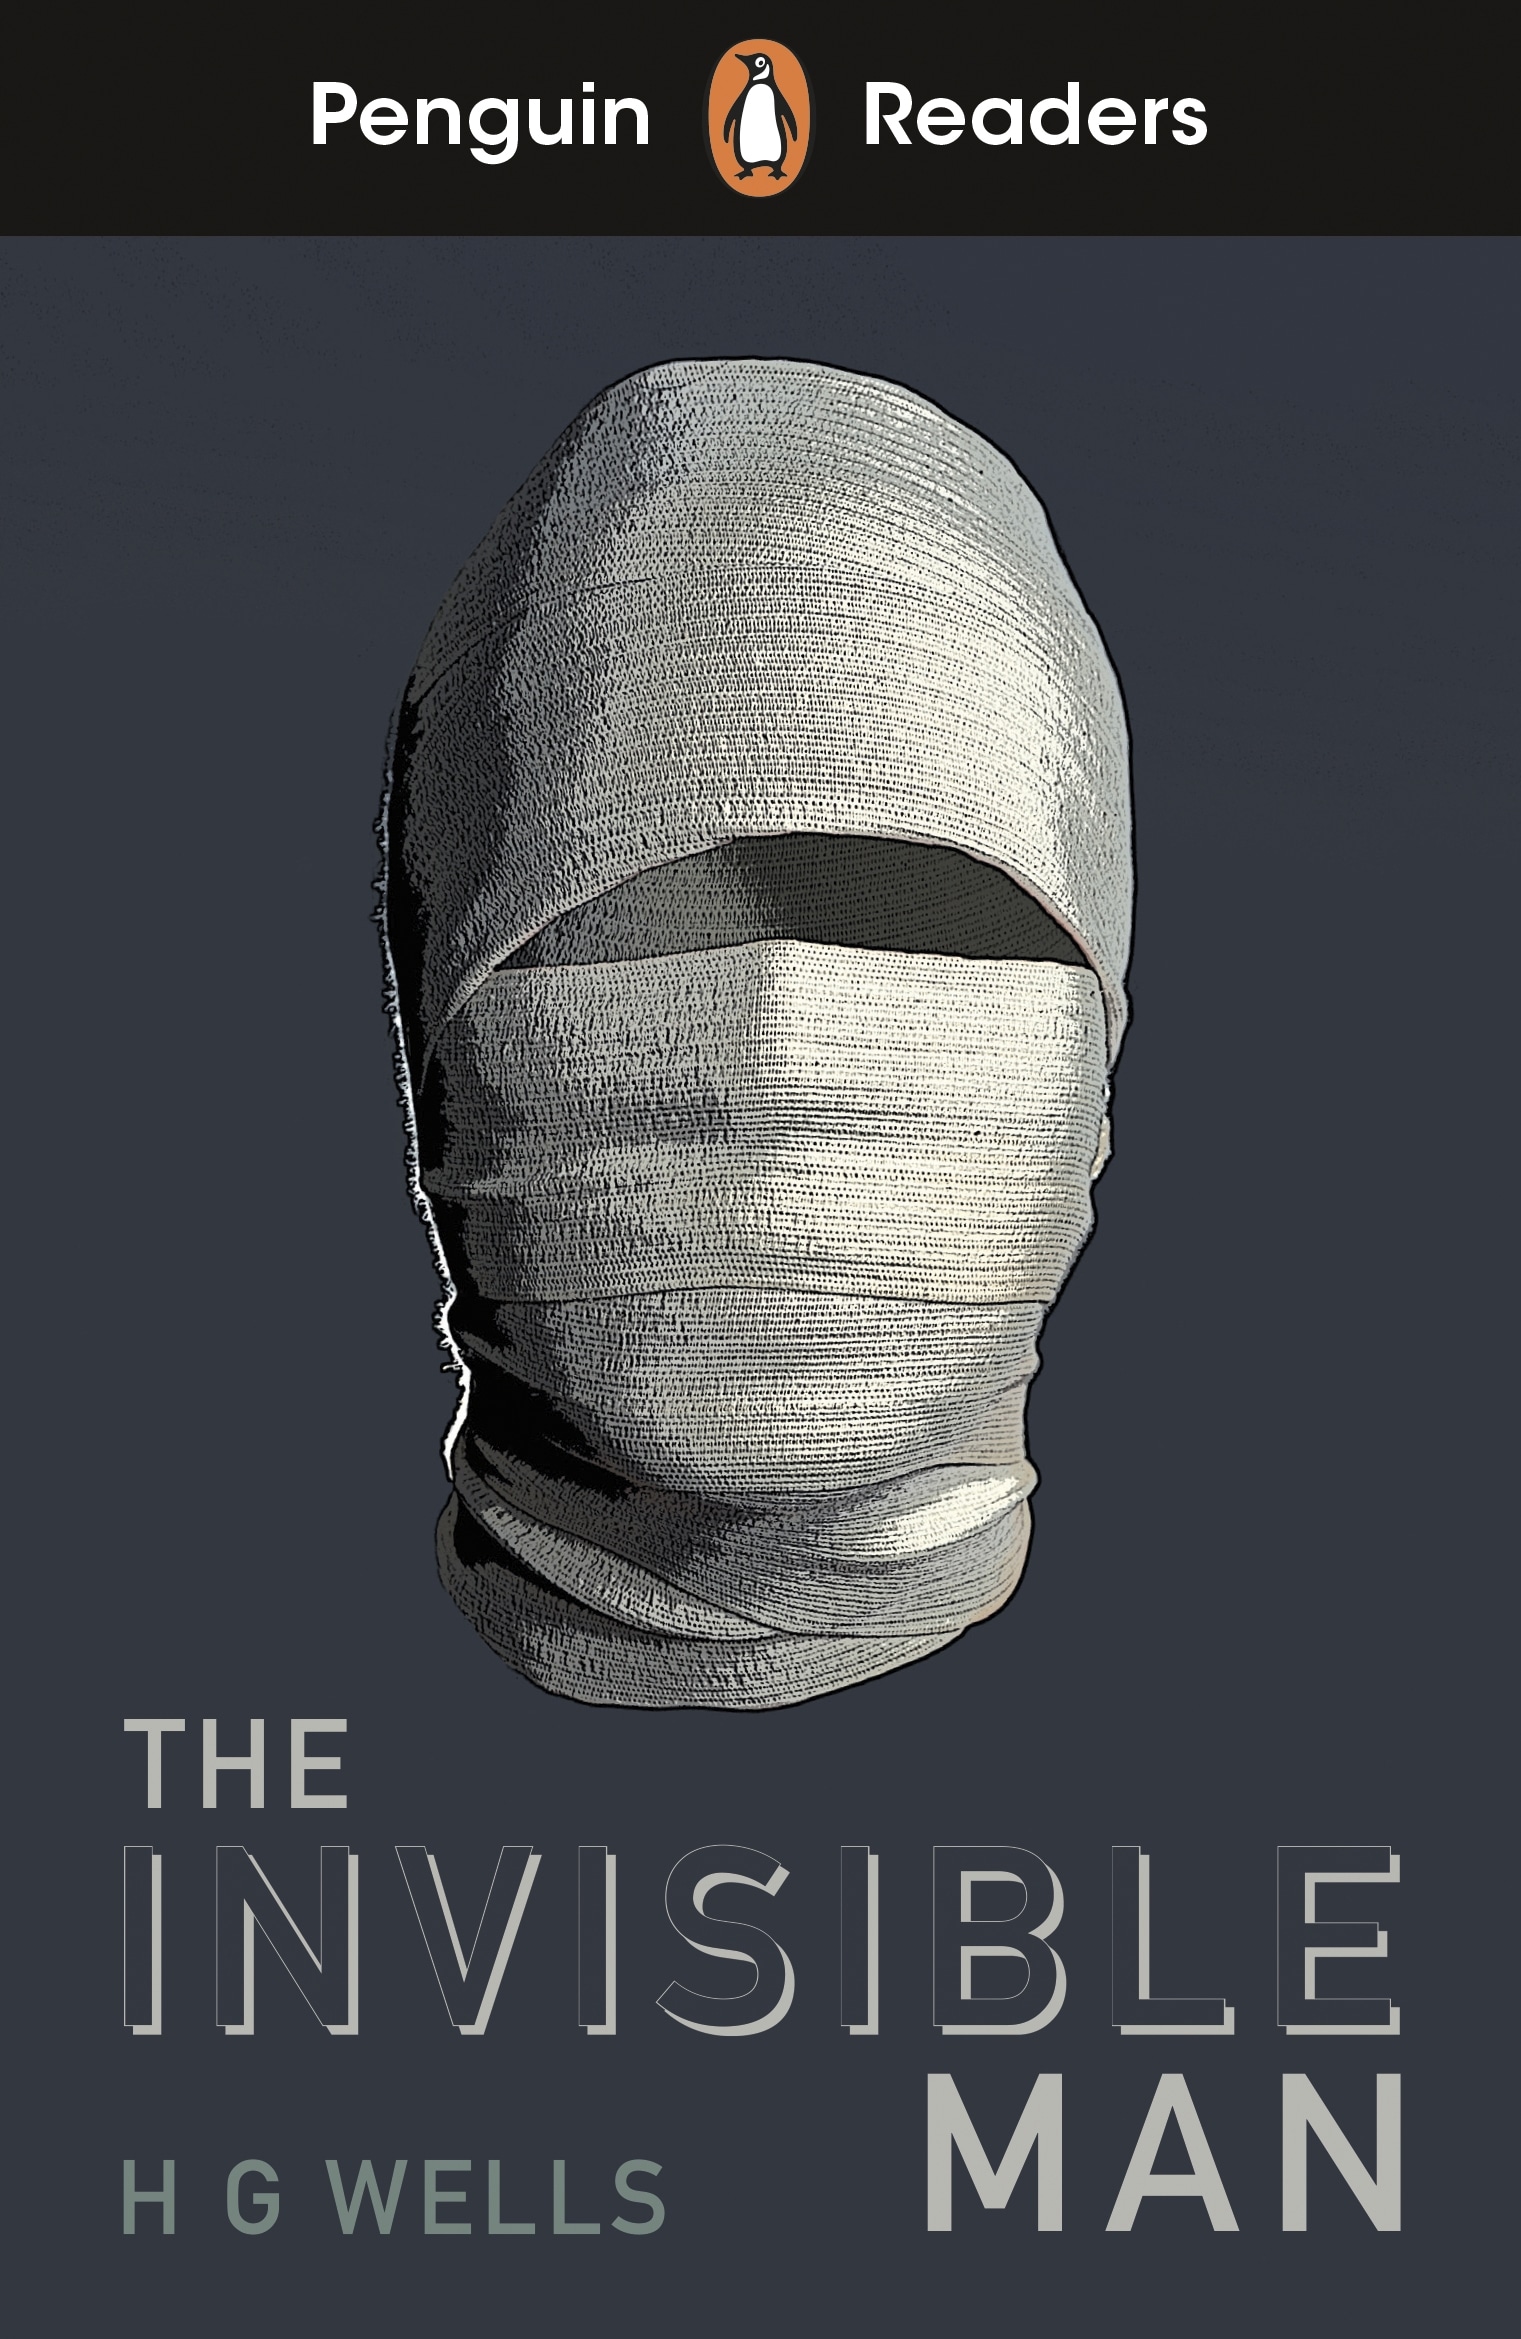 Book “Penguin Readers Level 4: The Invisible Man (ELT Graded Reader)” by H G Wells — May 6, 2021